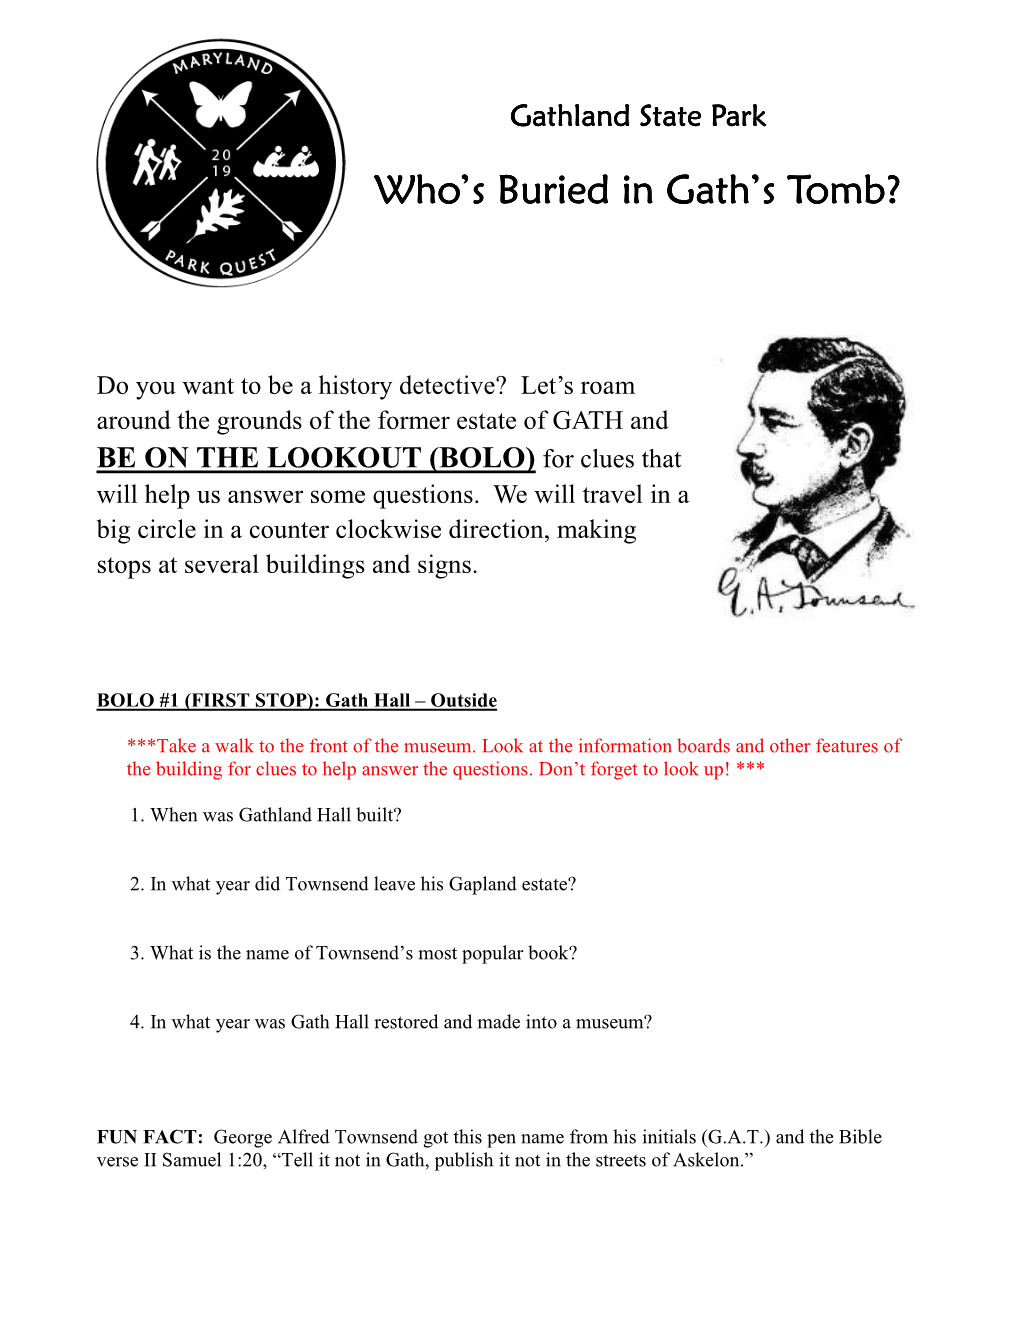 Who's Buried in Gath's Tomb?